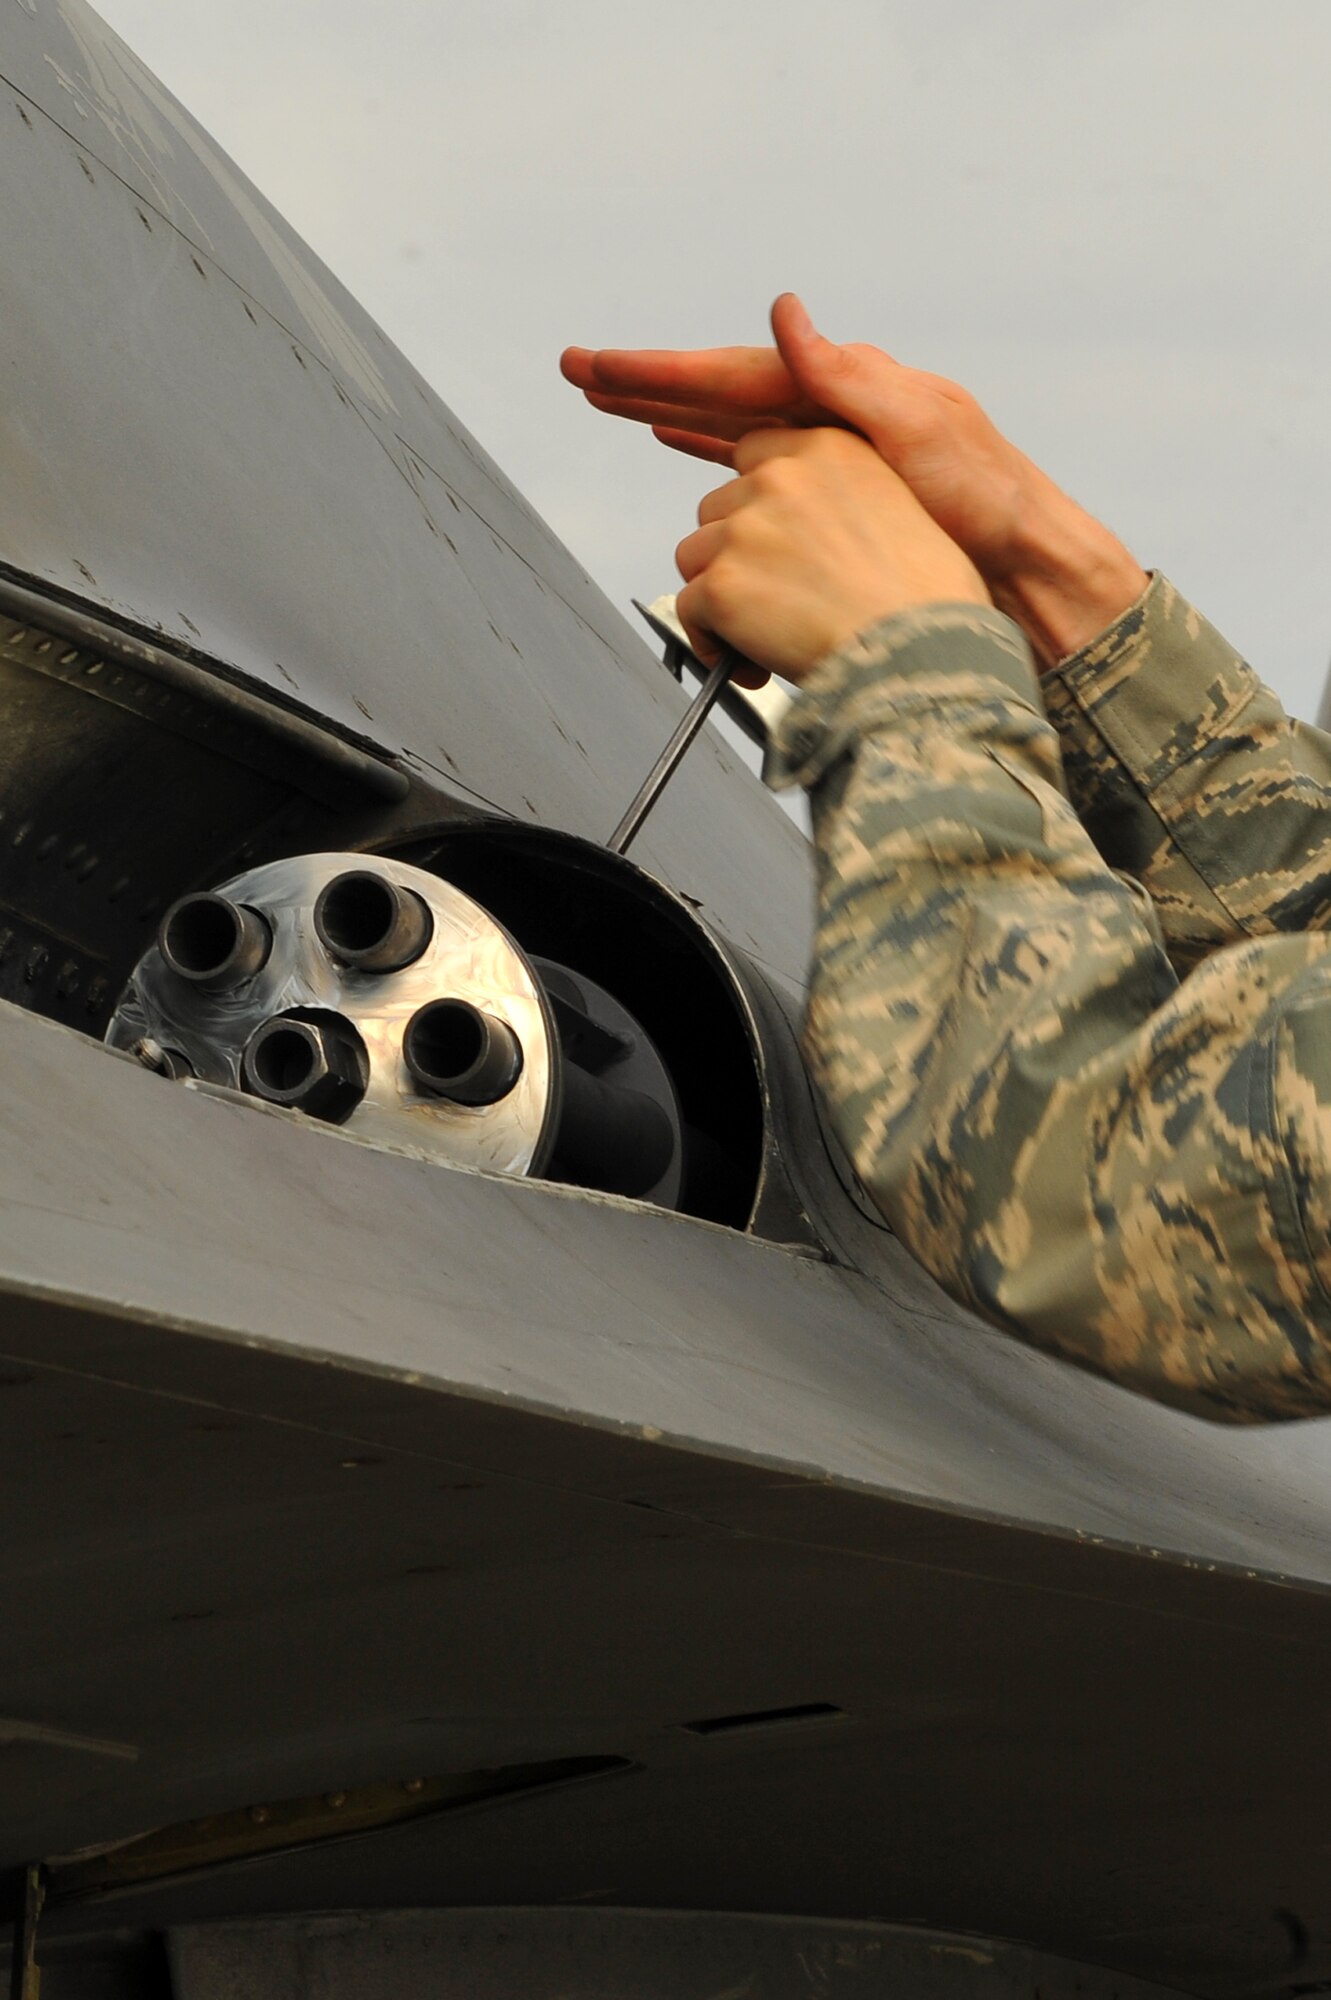 SPANGDAHLEM AIR BASE, Germany – Senior Airman Stephen Hoffler, 480th Aircraft Maintenance Unit weapons load crew member, puts a panel back onto an F-16 Fighting Falcon during mandatory 30 day gun-load maintenance on Ramp 4 here June 19. The 480th AMU plays a vital role in supporting the F-16’s combat training mission, which prepares pilots for regional defense and air superiority. (U.S. Air Force photo by Airman 1st Class Dillon/Released)